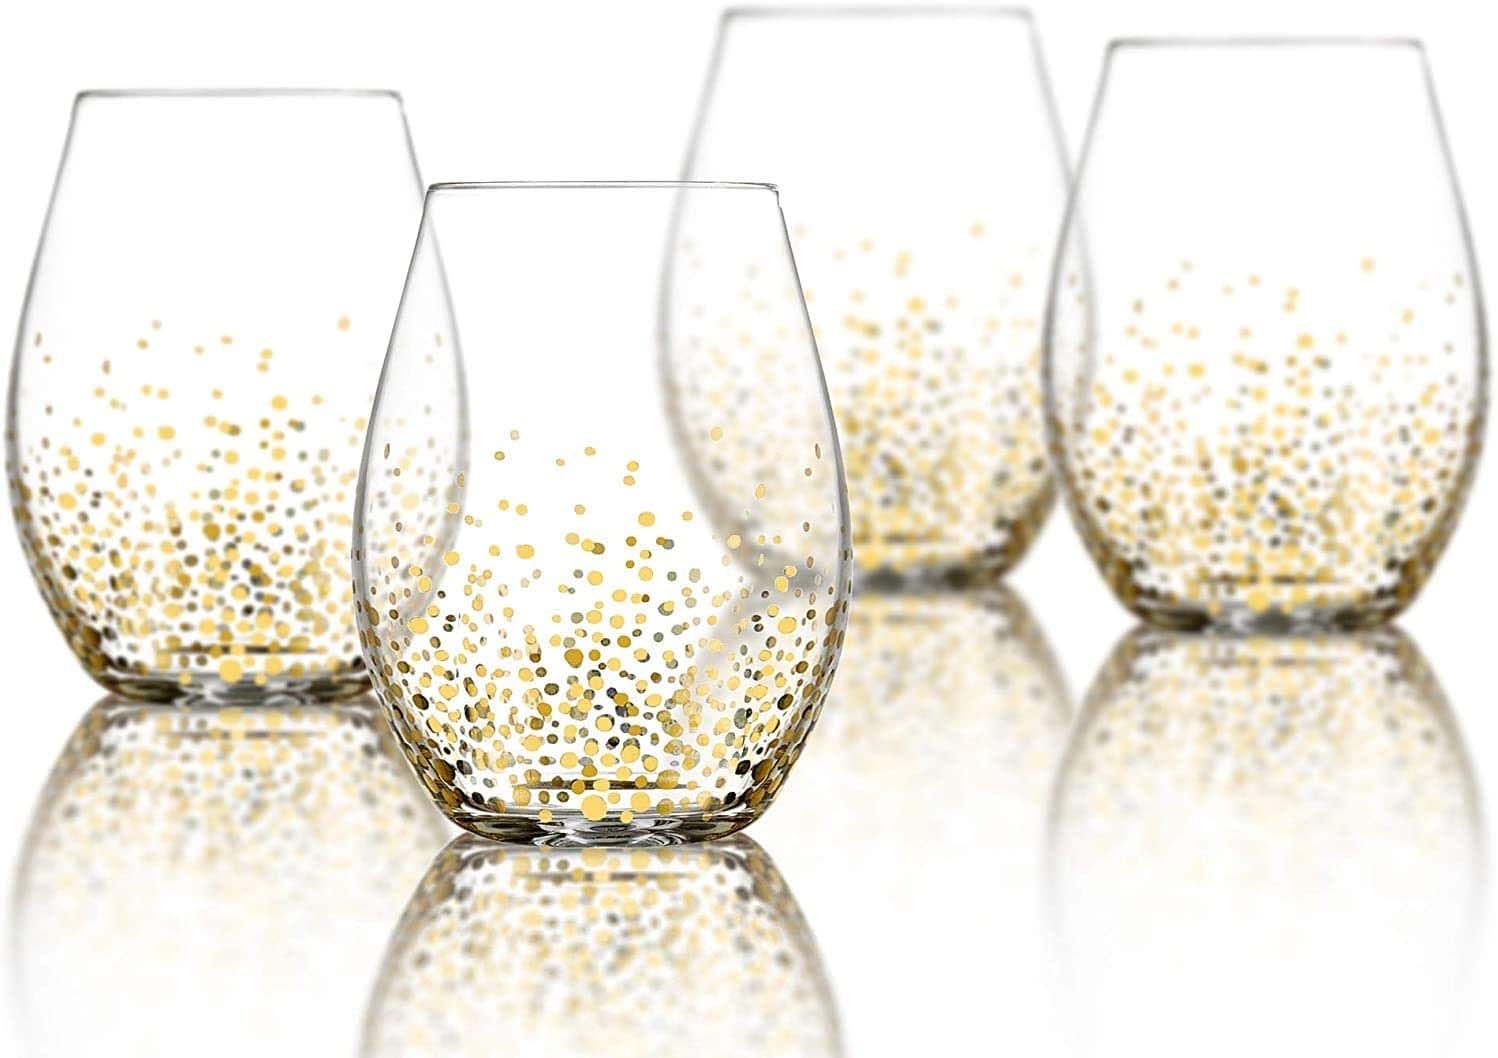 Luxh Stemless Champagne Flutes Glass - Set of 4, 9.4 oz